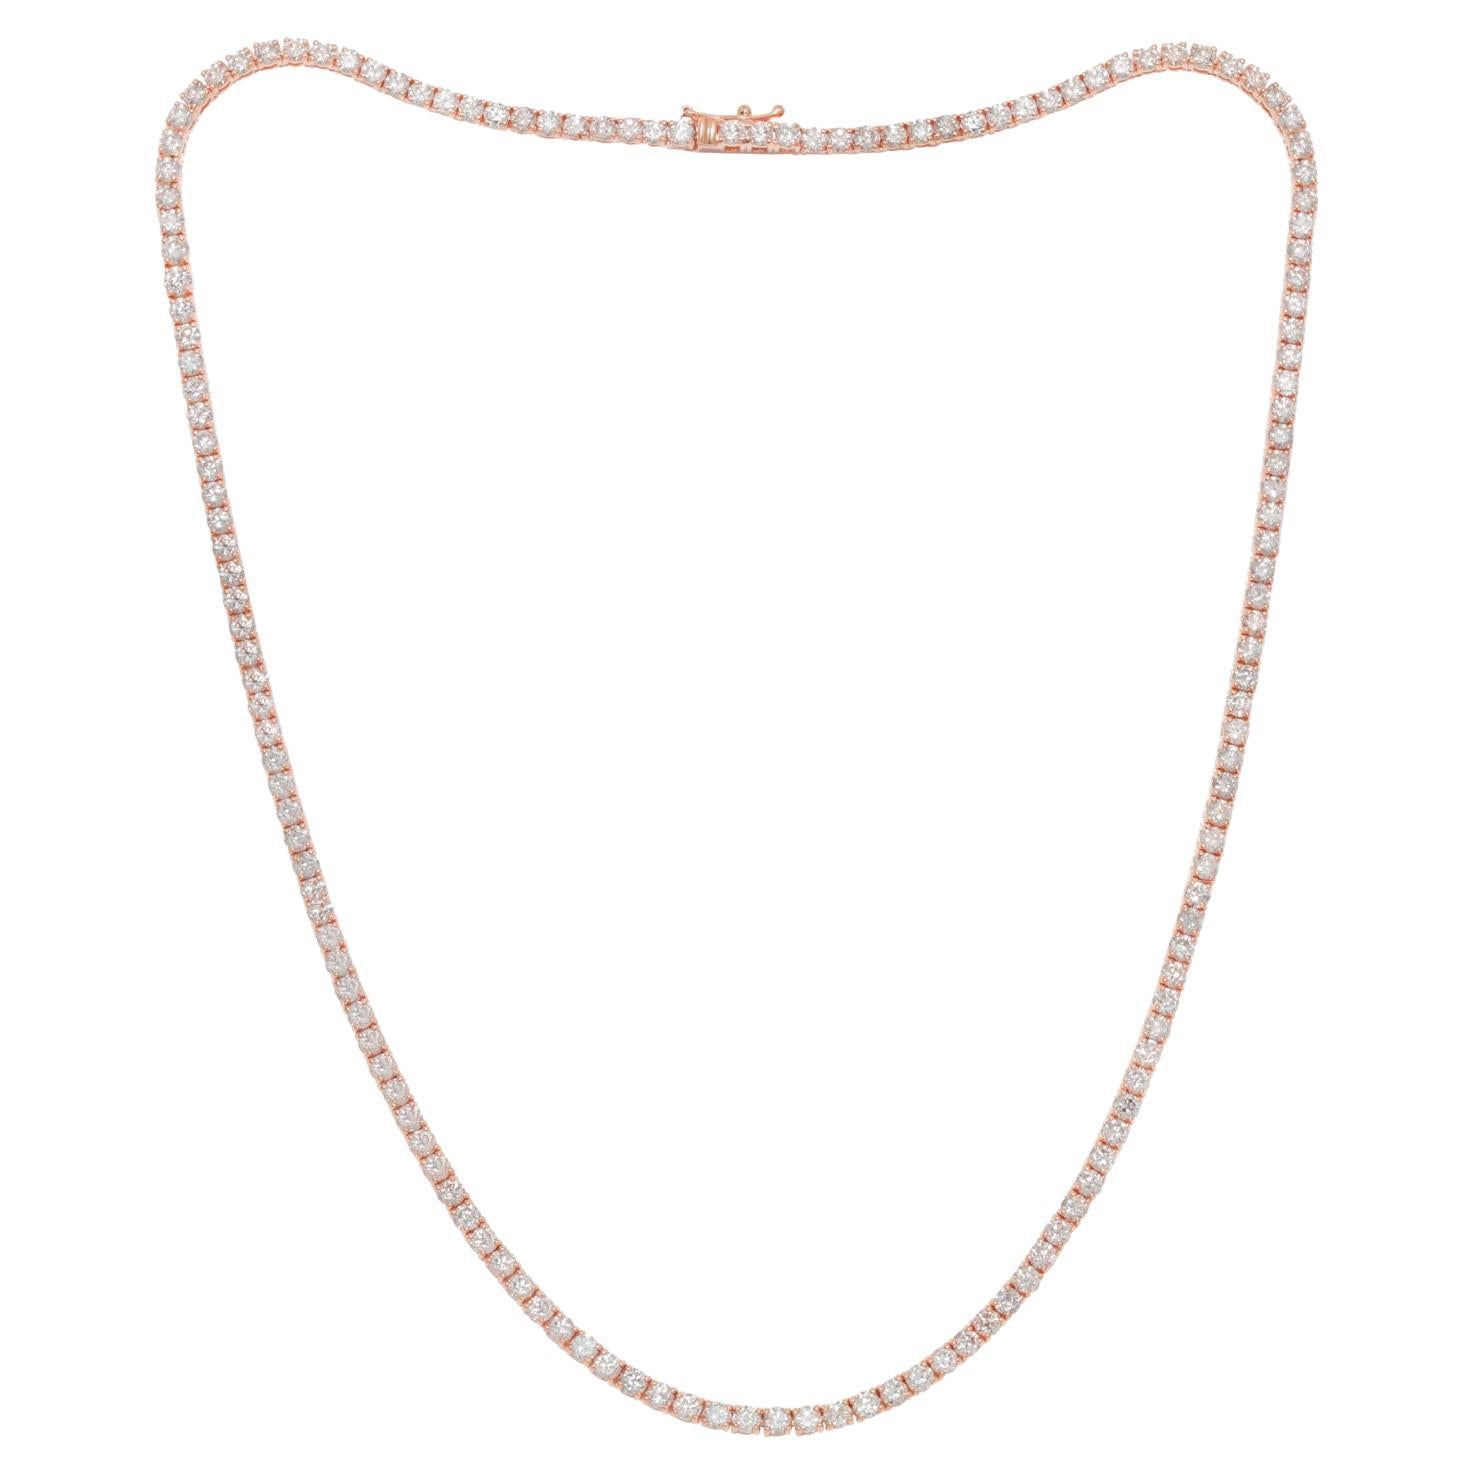 Diana M. 14kt rose gold diamond tennis necklace containing 9.70cts  